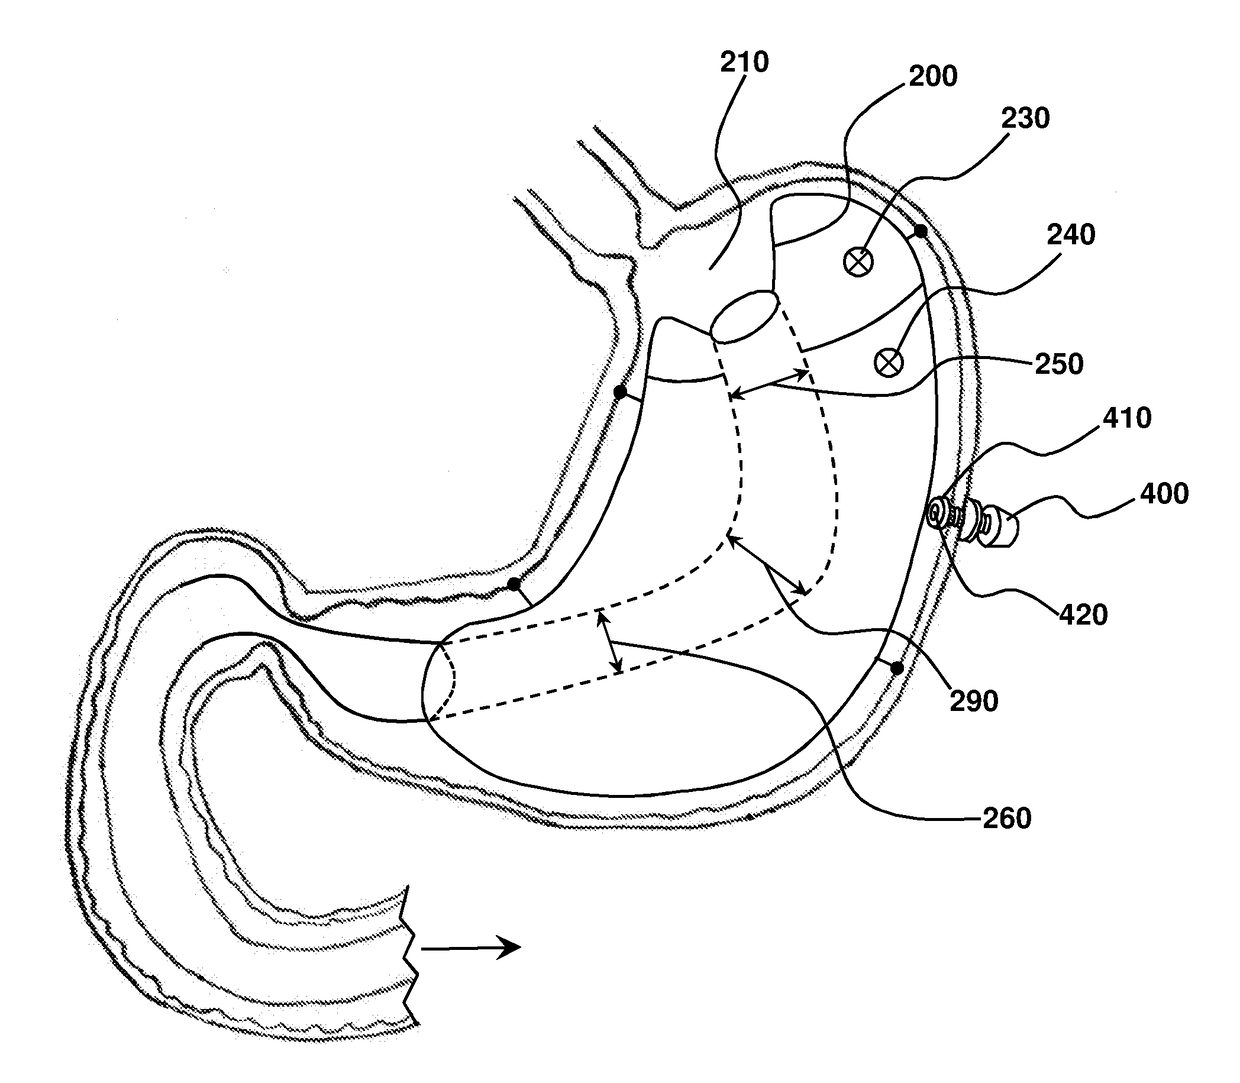 Sleeve-anchorable gastric balloon for weight loss